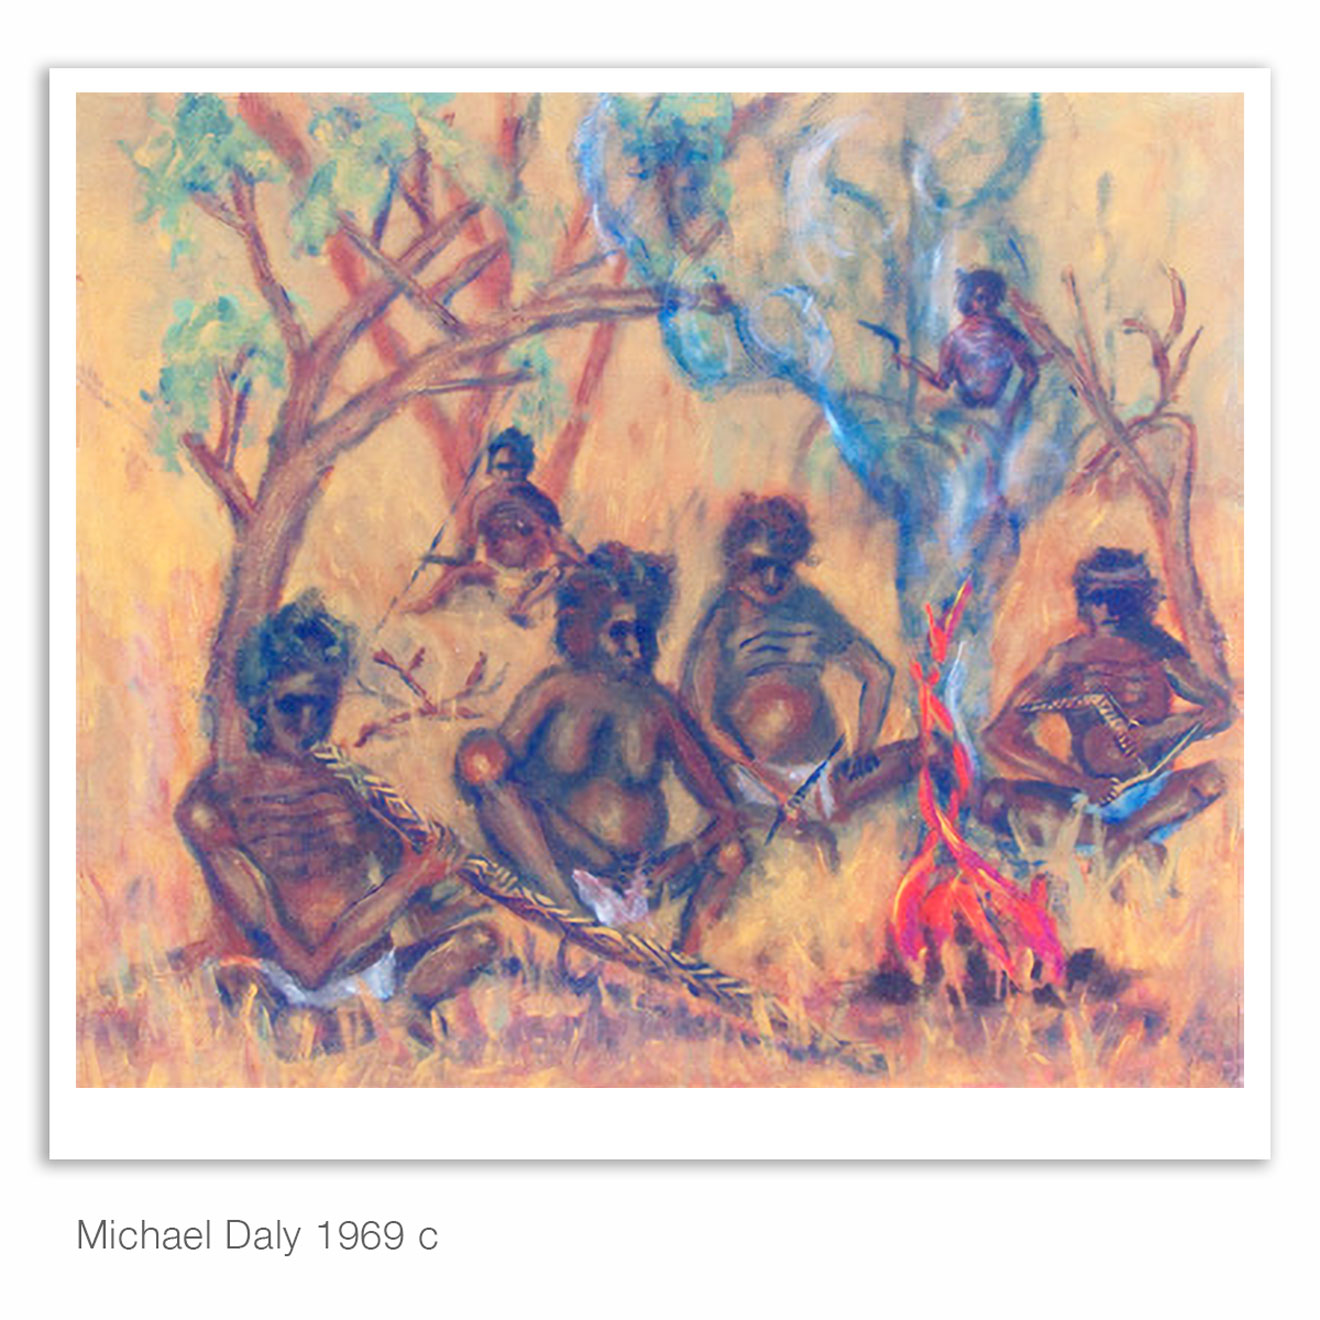 Aboriginals by Fireplace, Michael Daly Artist, Australia about 1969. 35x40 cm. Acrylic on masonite board. Outback 1960s, Young Toowoomba Artist.